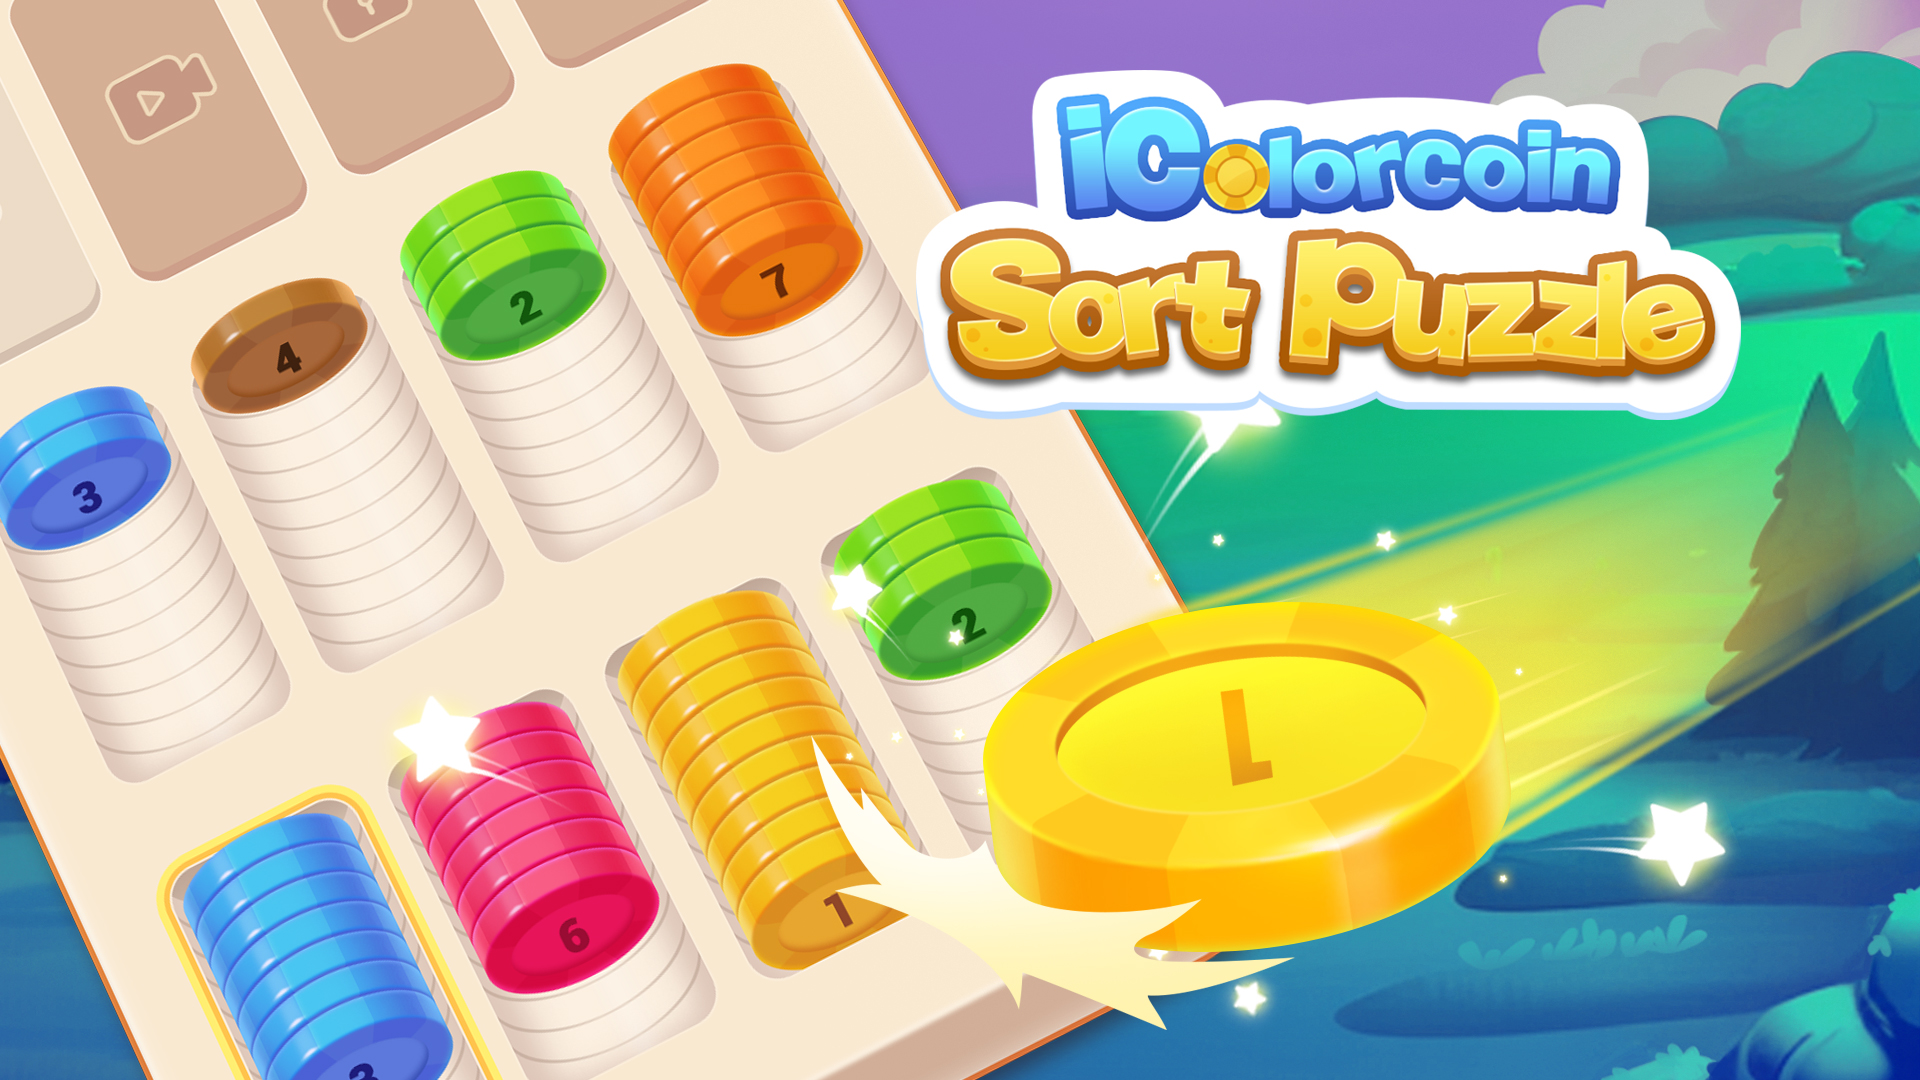 iColorcoin: Sort Puzzle Game Image